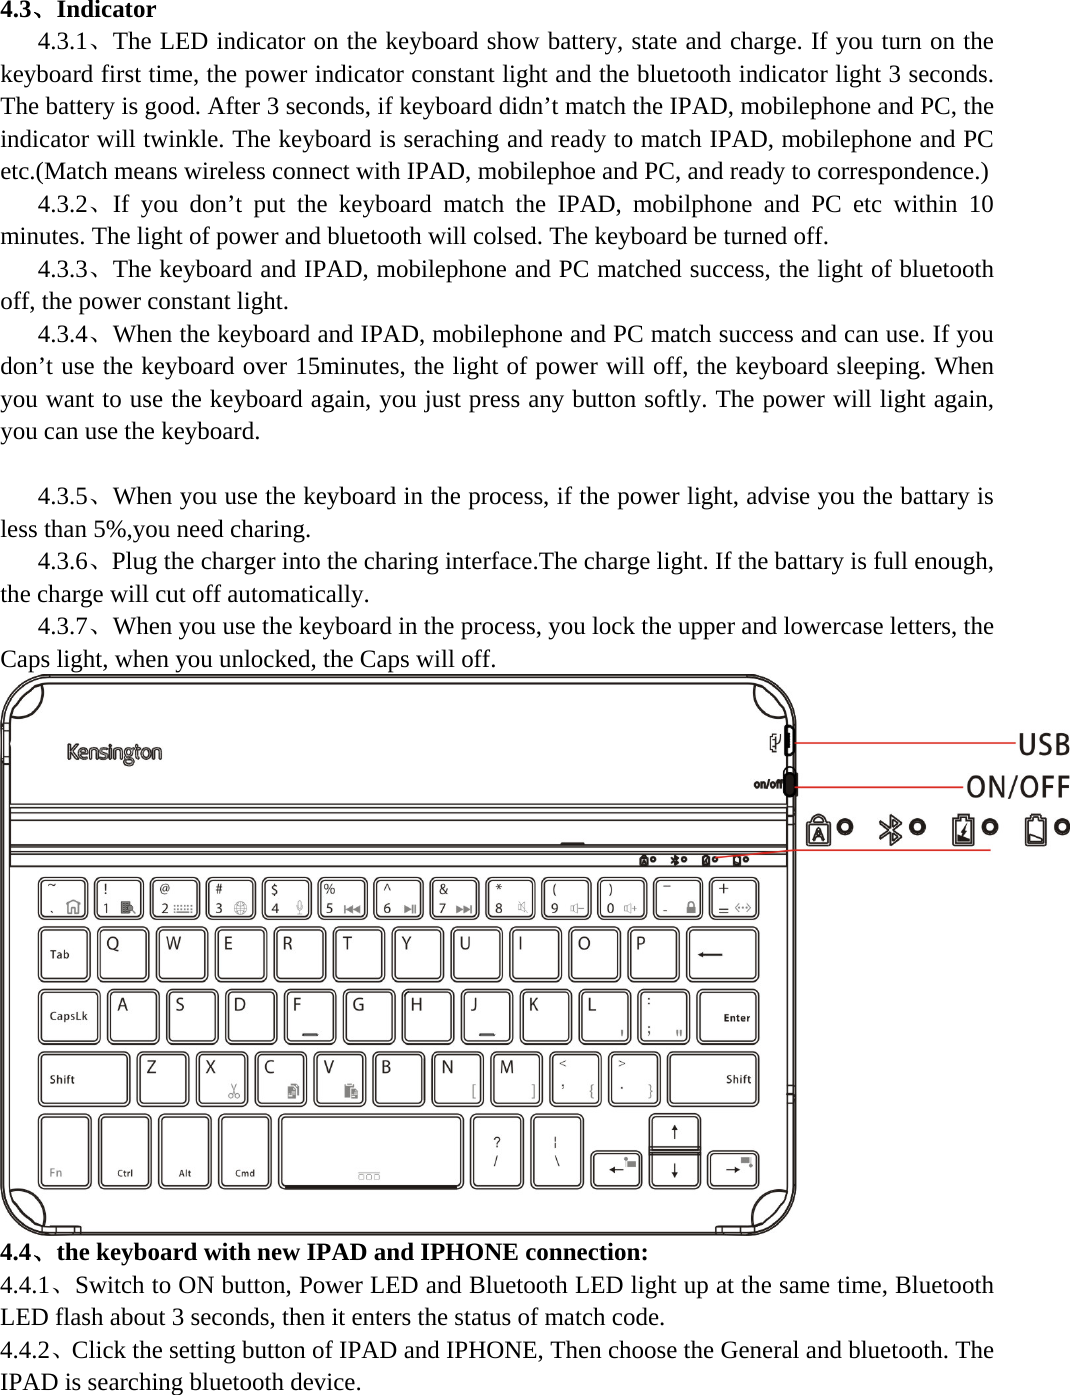  4.3、Indicator    4.3.1、The LED indicator on the keyboard show battery, state and charge. If you turn on the keyboard first time, the power indicator constant light and the bluetooth indicator light 3 seconds. The battery is good. After 3 seconds, if keyboard didn’t match the IPAD, mobilephone and PC, the indicator will twinkle. The keyboard is seraching and ready to match IPAD, mobilephone and PC etc.(Match means wireless connect with IPAD, mobilephoe and PC, and ready to correspondence.)    4.3.2、If you don’t put the keyboard match the IPAD, mobilphone and PC etc within 10 minutes. The light of power and bluetooth will colsed. The keyboard be turned off.    4.3.3、The keyboard and IPAD, mobilephone and PC matched success, the light of bluetooth off, the power constant light.    4.3.4、When the keyboard and IPAD, mobilephone and PC match success and can use. If you don’t use the keyboard over 15minutes, the light of power will off, the keyboard sleeping. When you want to use the keyboard again, you just press any button softly. The power will light again, you can use the keyboard.       4.3.5、When you use the keyboard in the process, if the power light, advise you the battary is less than 5%,you need charing.    4.3.6、Plug the charger into the charing interface.The charge light. If the battary is full enough, the charge will cut off automatically.    4.3.7、When you use the keyboard in the process, you lock the upper and lowercase letters, the Caps light, when you unlocked, the Caps will off.  4.4、the keyboard with new IPAD and IPHONE connection: 4.4.1、Switch to ON button, Power LED and Bluetooth LED light up at the same time, Bluetooth LED flash about 3 seconds, then it enters the status of match code.   4.4.2、Click the setting button of IPAD and IPHONE, Then choose the General and bluetooth. The IPAD is searching bluetooth device. 